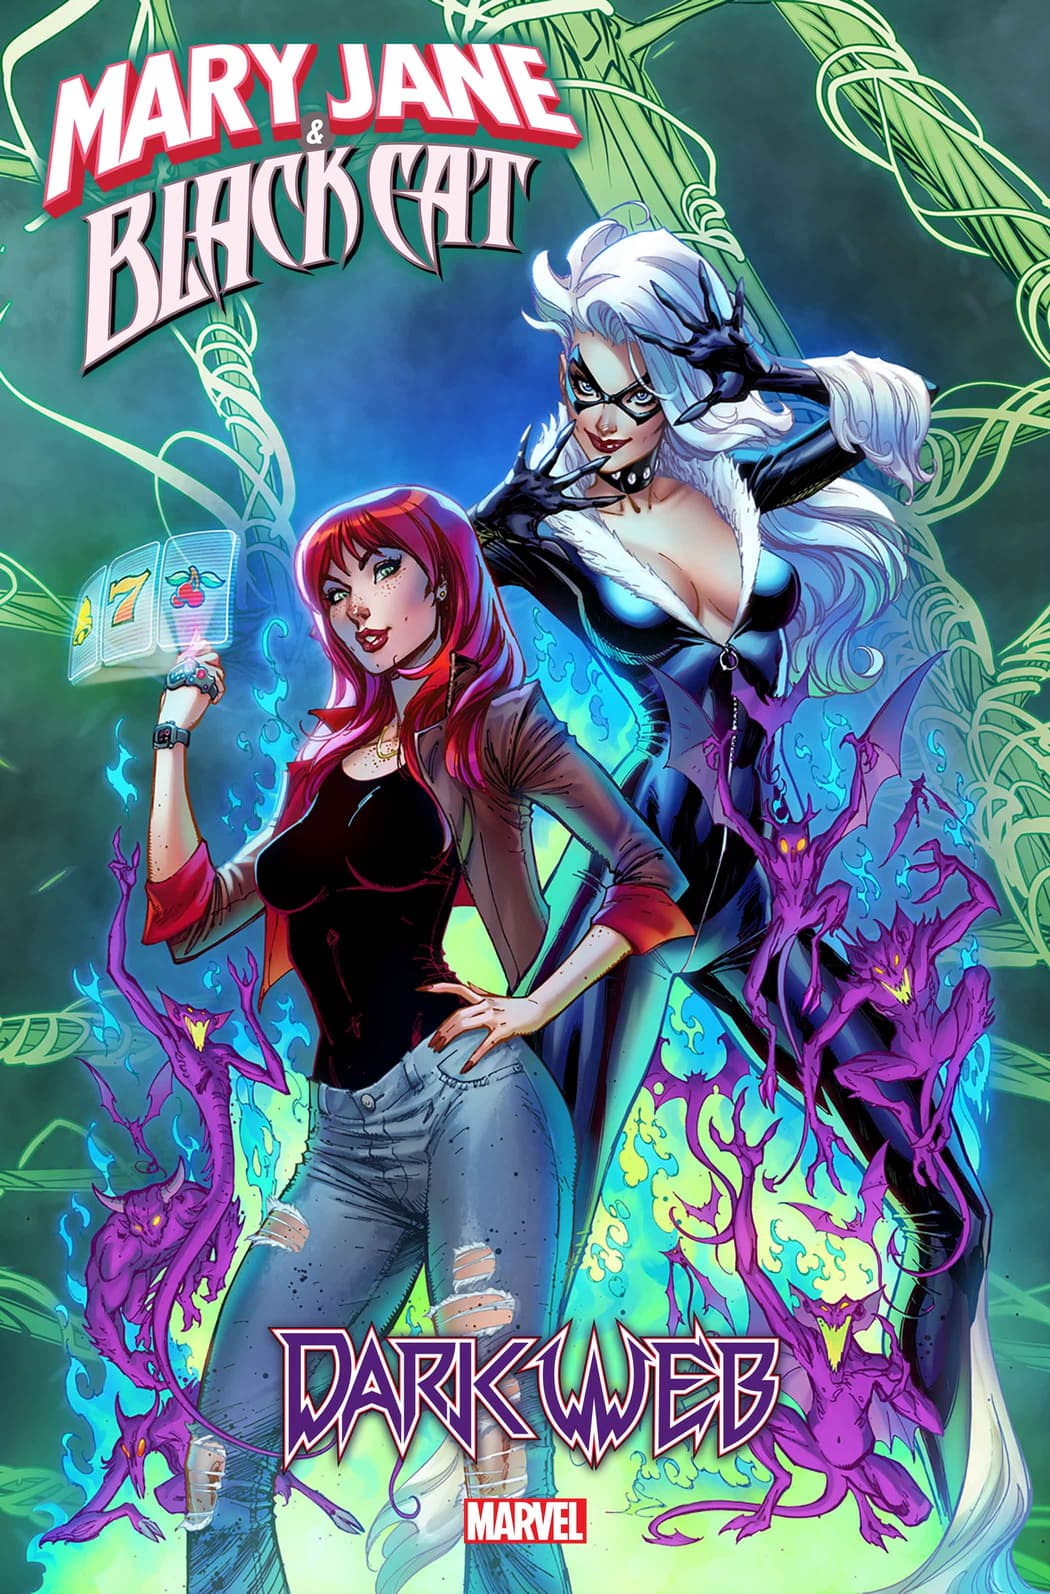 MARY JANE & BLACK CAT #1 cover by J. Scott Campbell